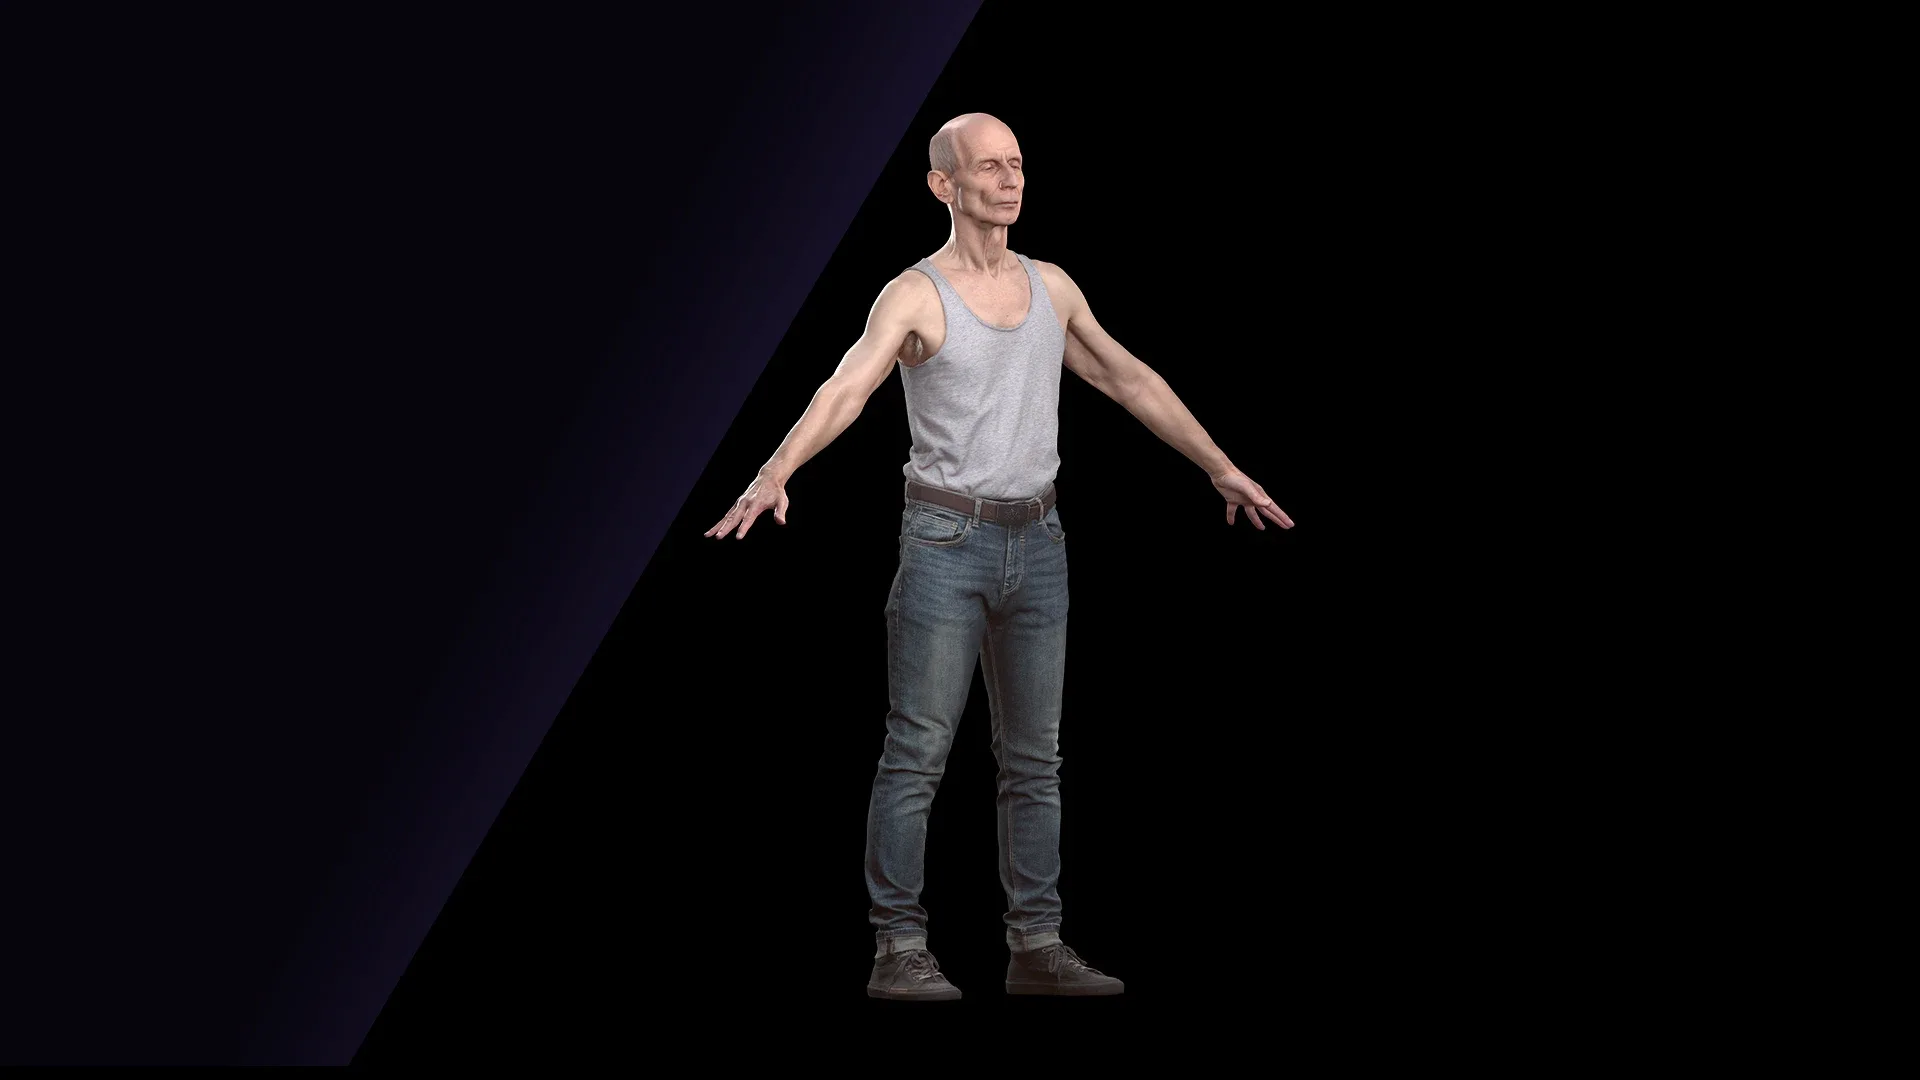 Cleaned A Pose Scan | 3D Model Marcus Doyle Dressed